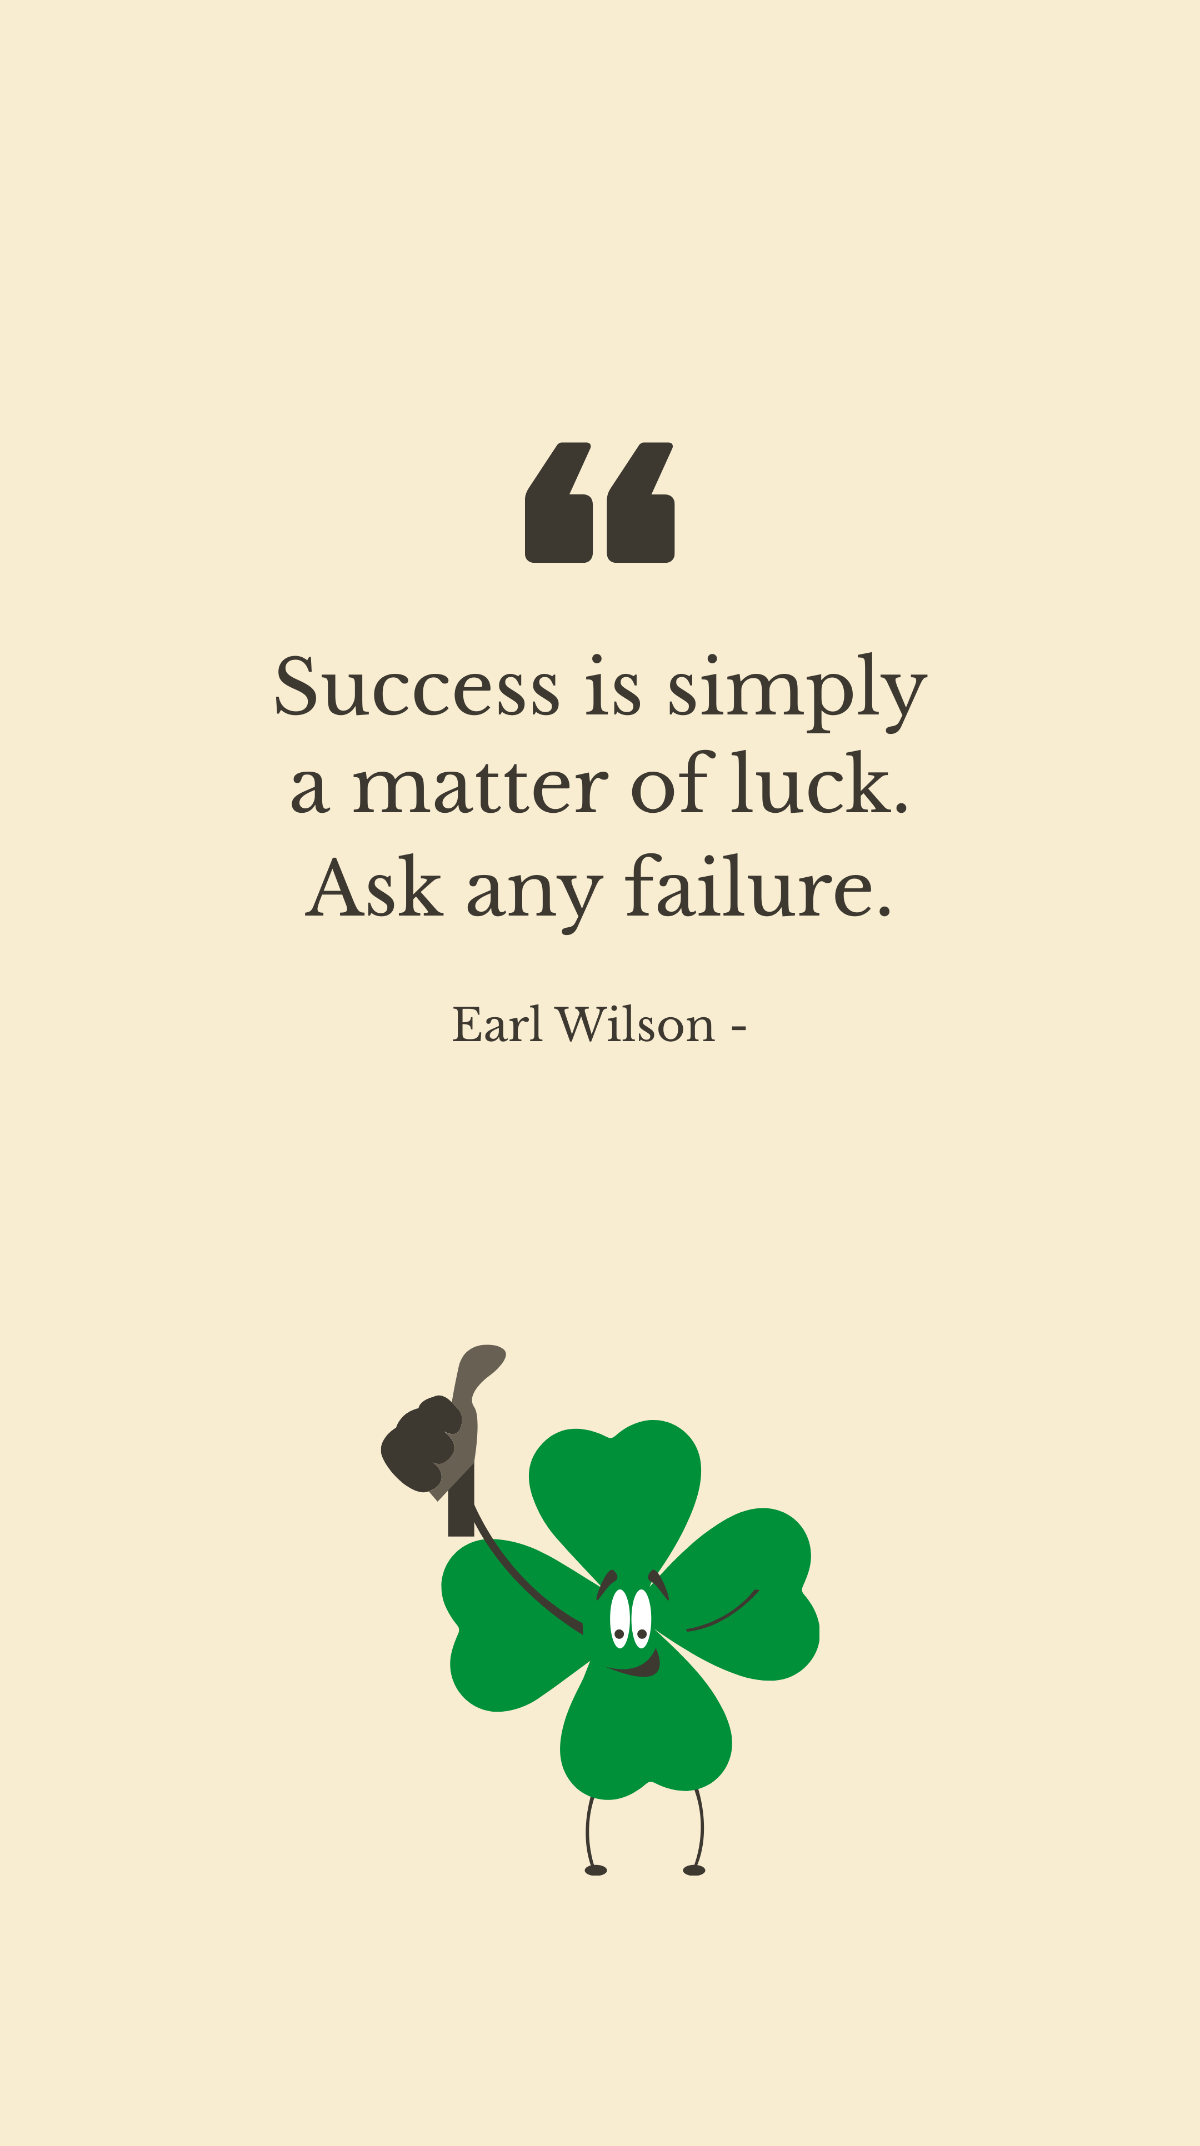 Earl Wilson - Success is simply a matter of luck. Ask any failure.